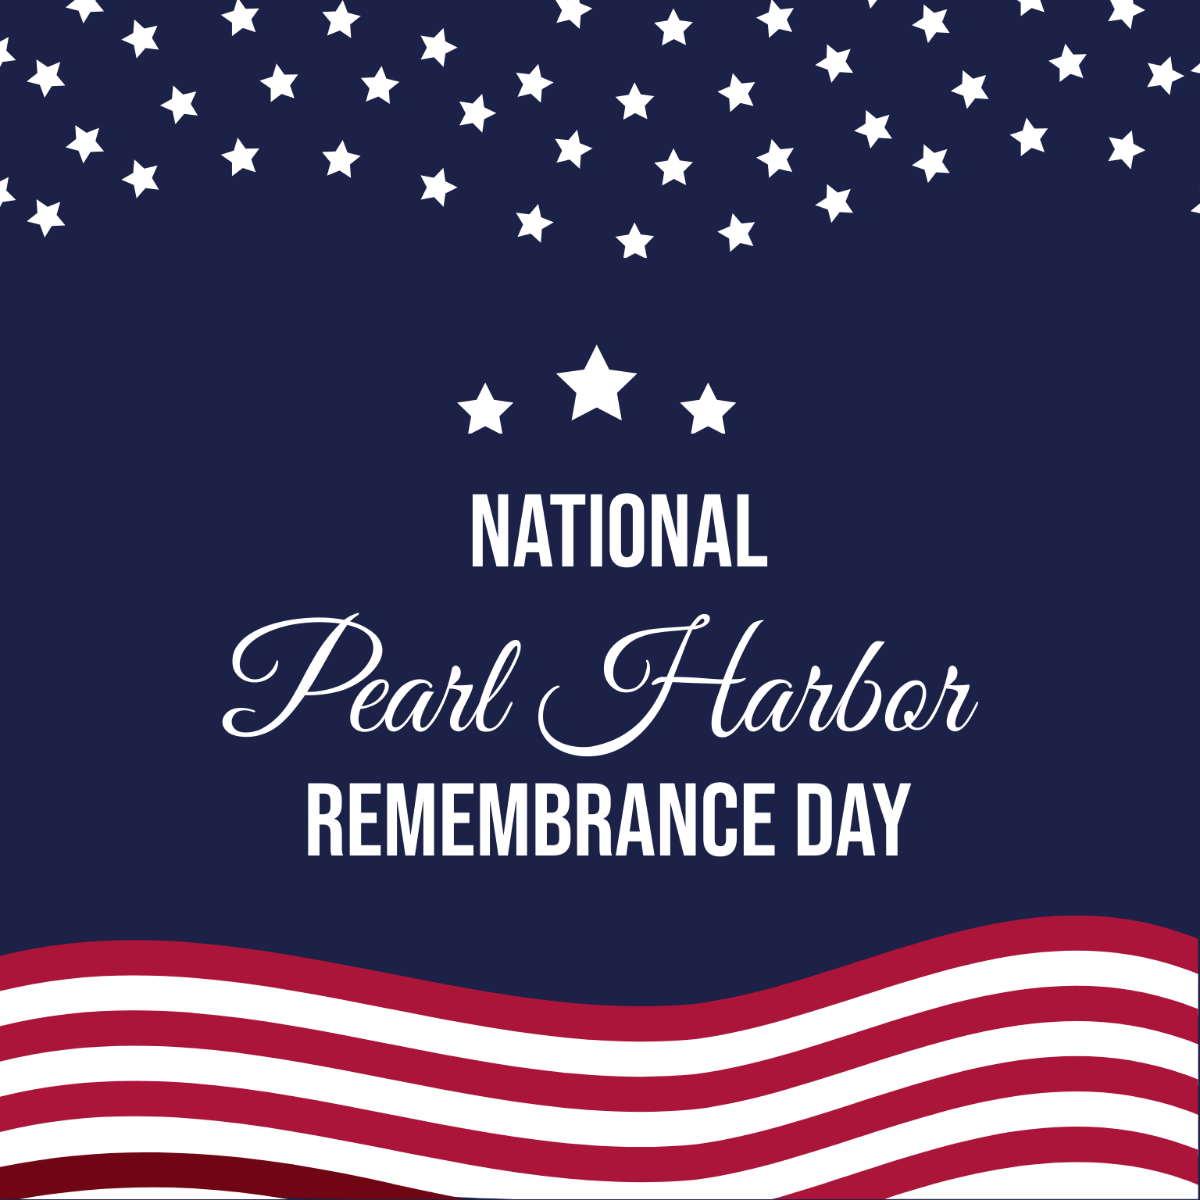 National Pearl Harbor Remembrance Day Vector Template